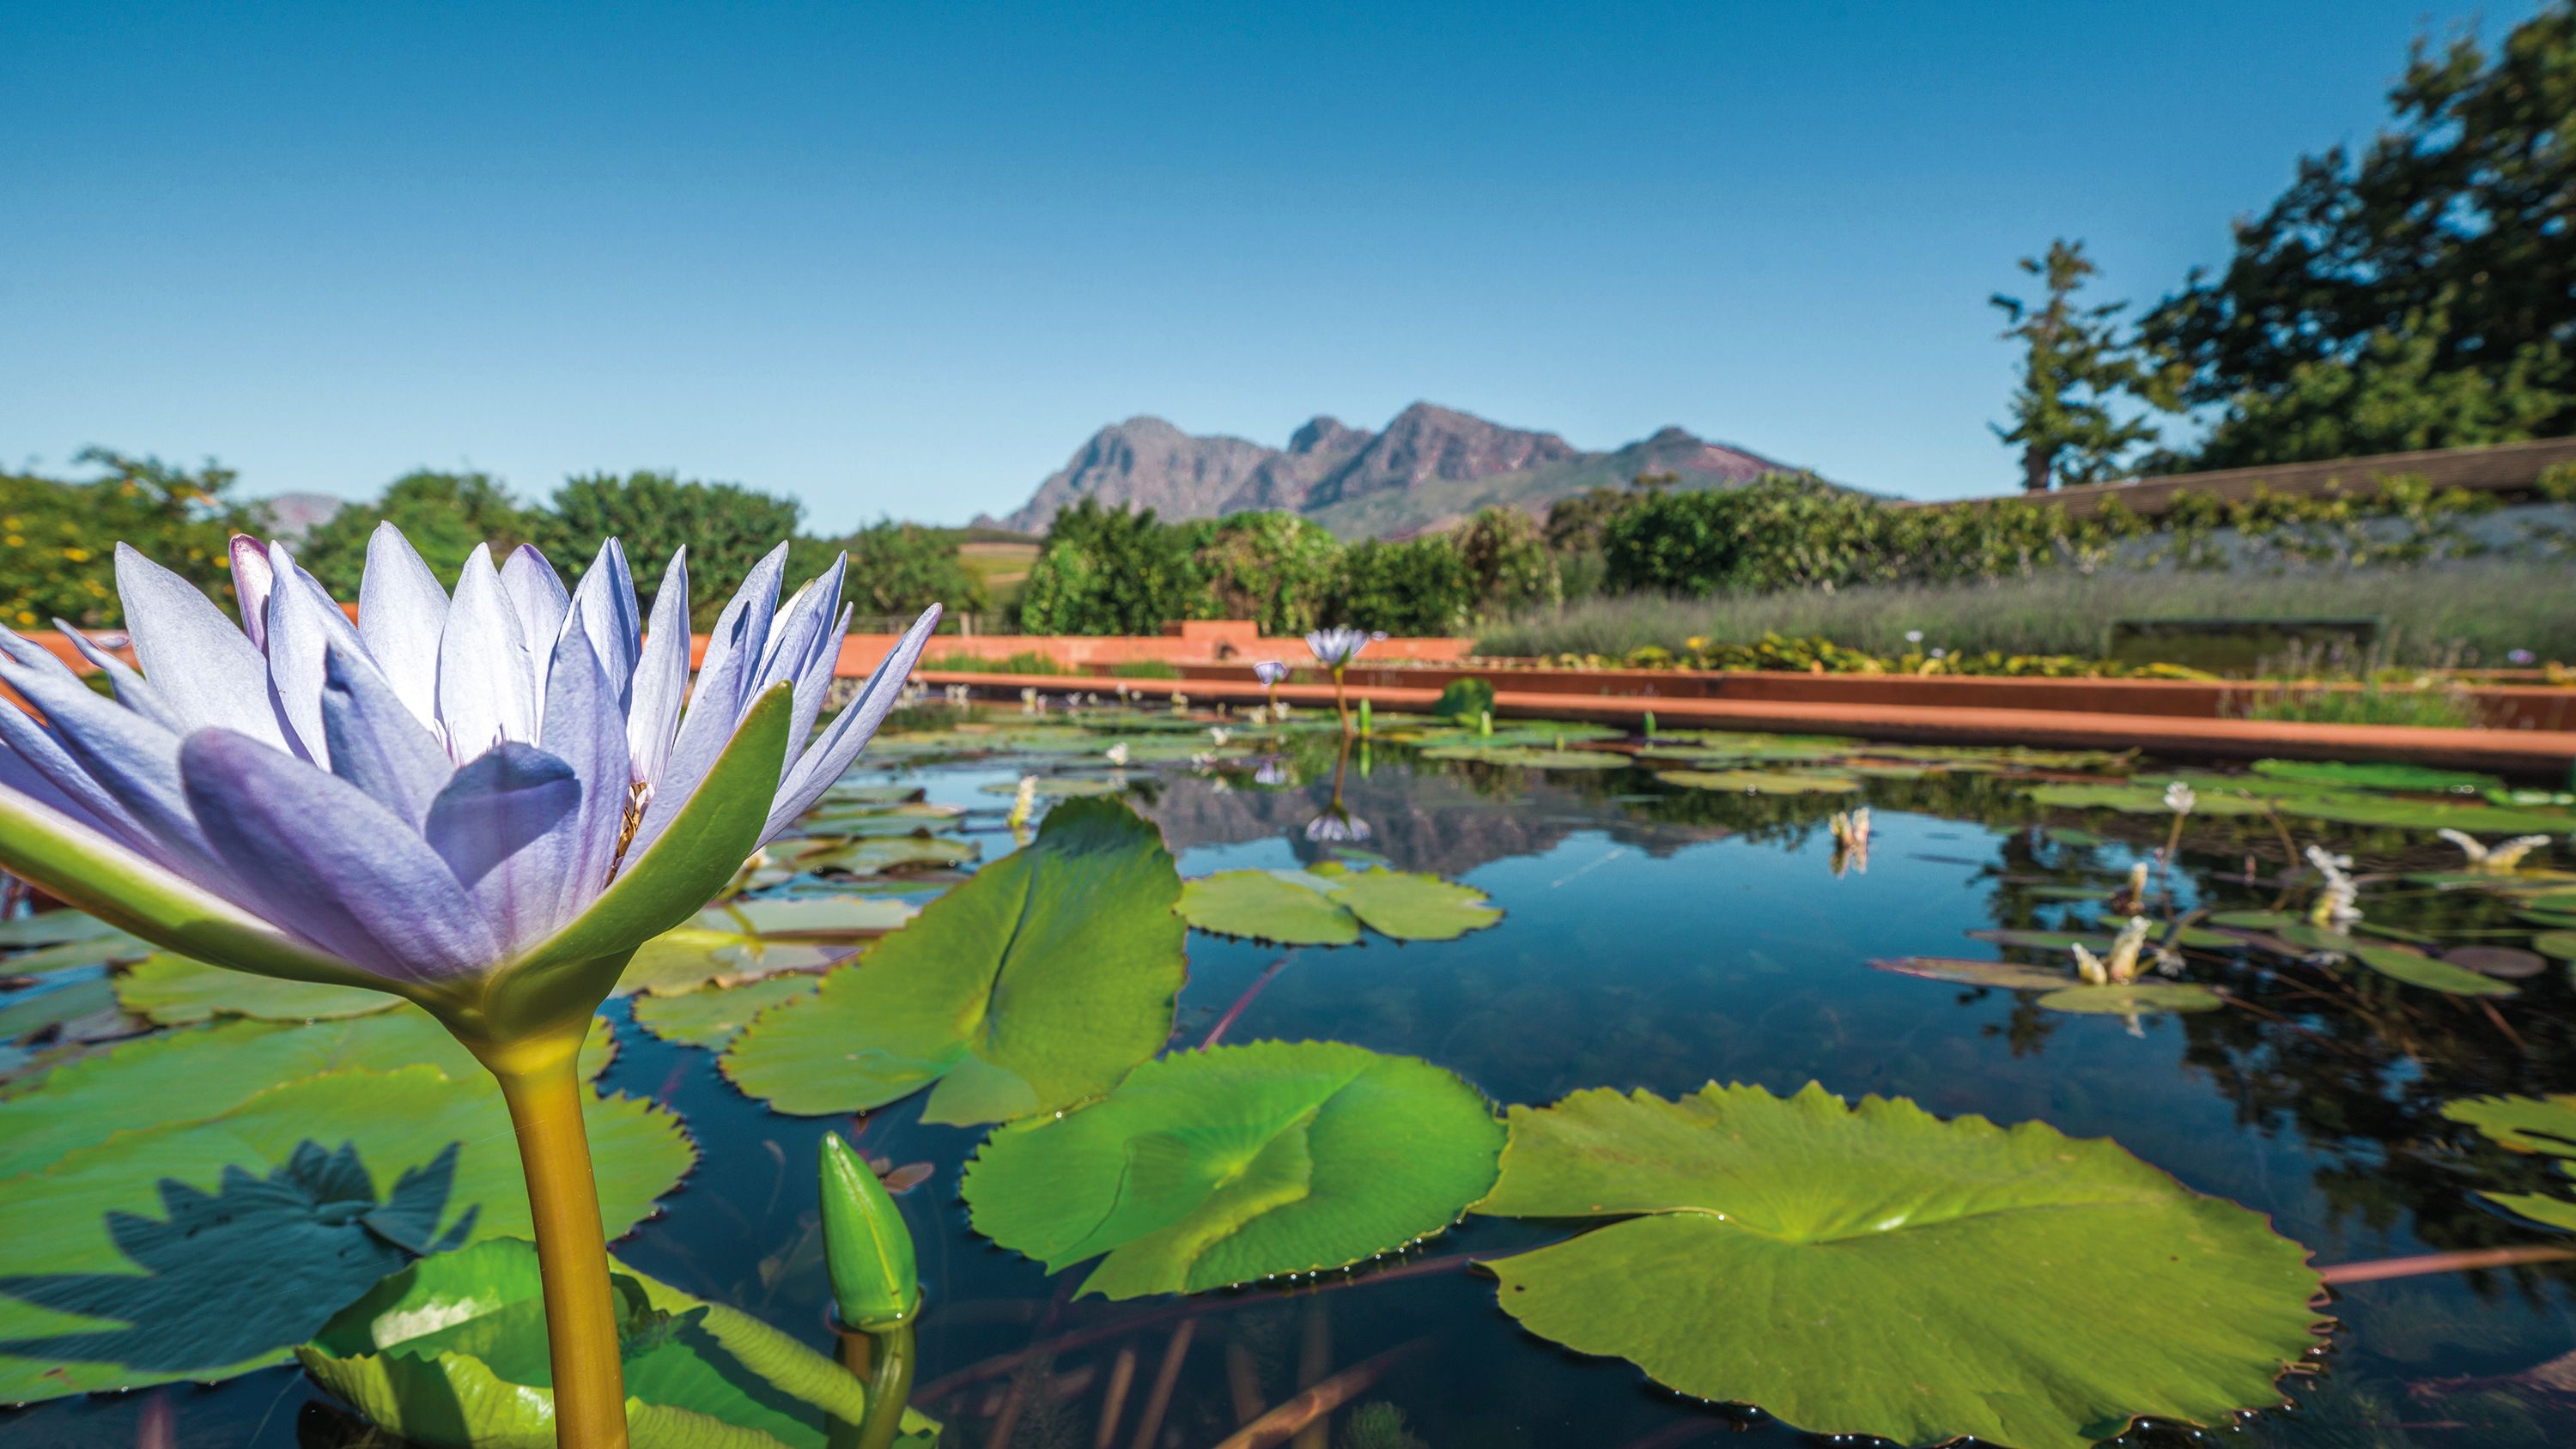 tourhub | Brightwater Holidays | South Africa’s Garden Route 